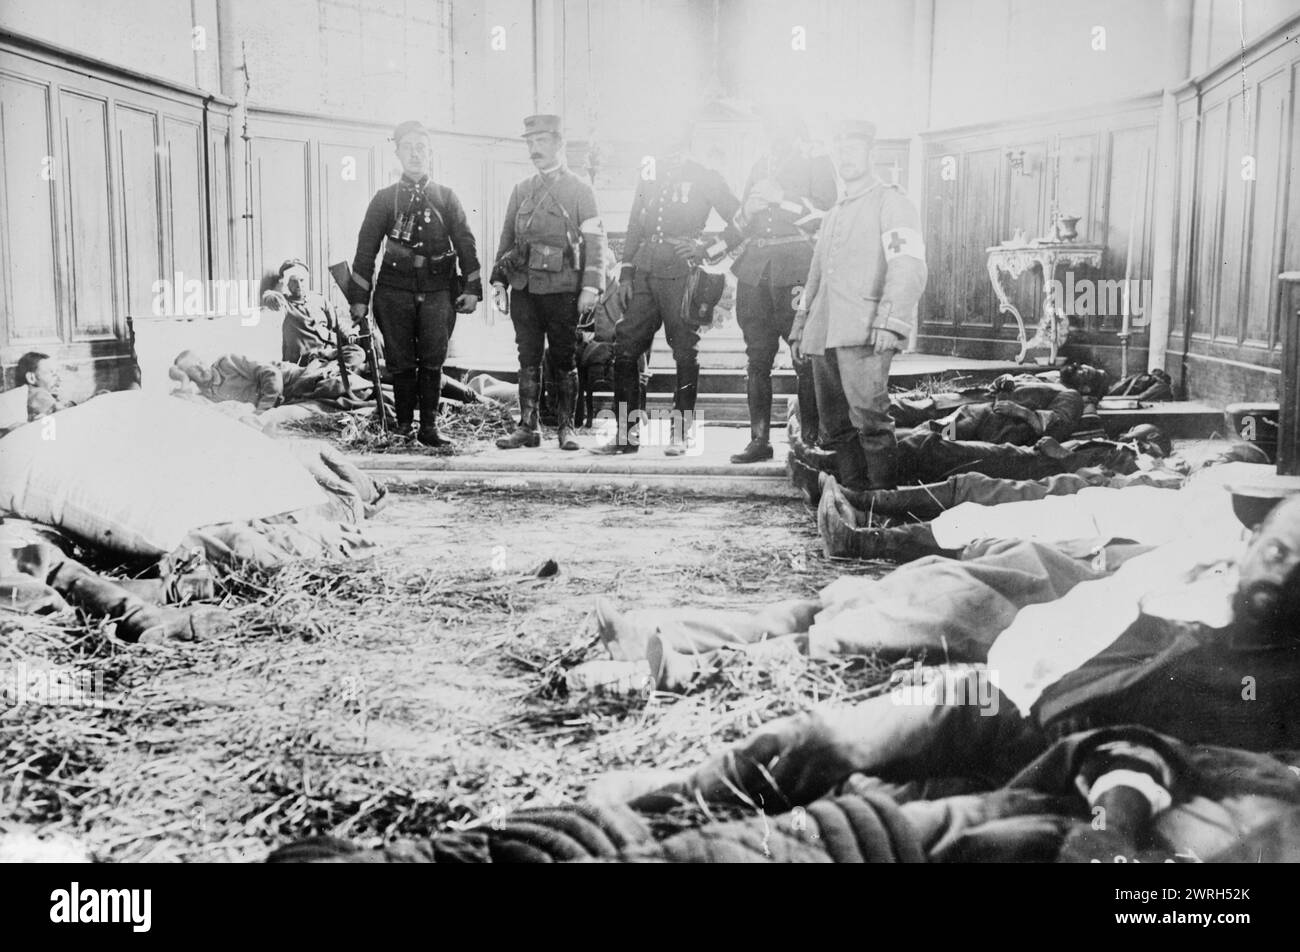 Neufmentier [i.e., Chauconin-Neufmontiers], French &amp; German wounded in church, between c1910 and c1915. French and German wounded soldiers in a church, in Chauconin-Neufmontiers, France during World War I. Stock Photo